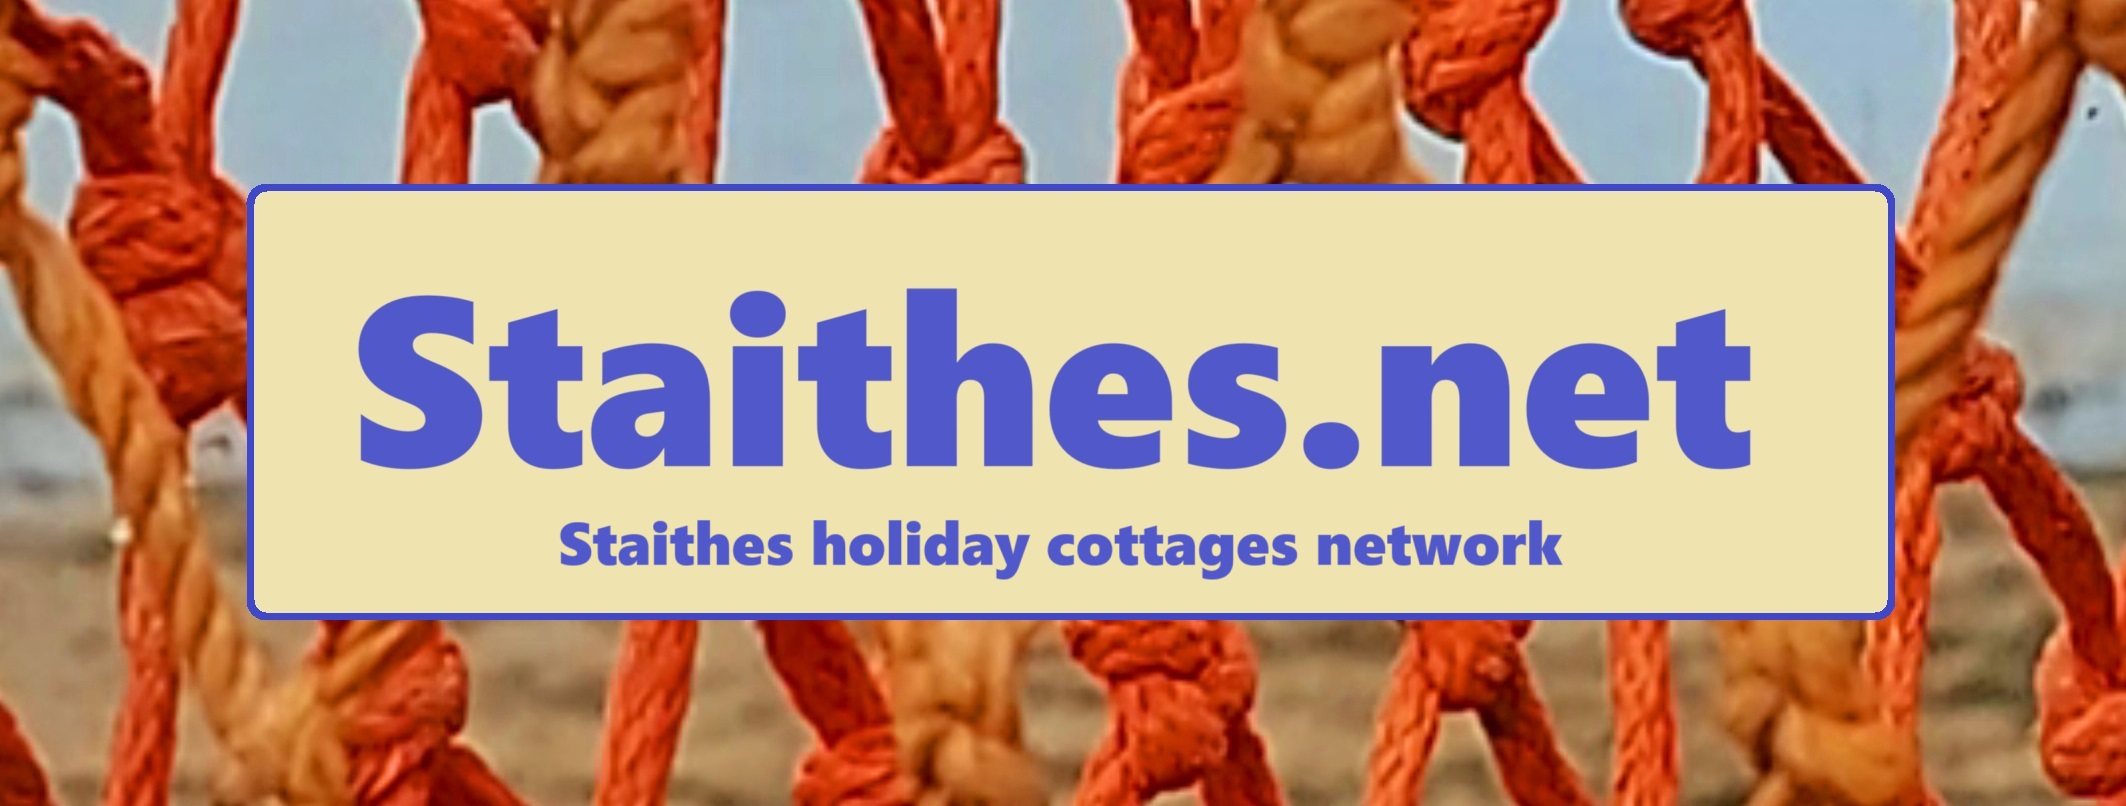 staithes.net - holiday cottage network at Staithes